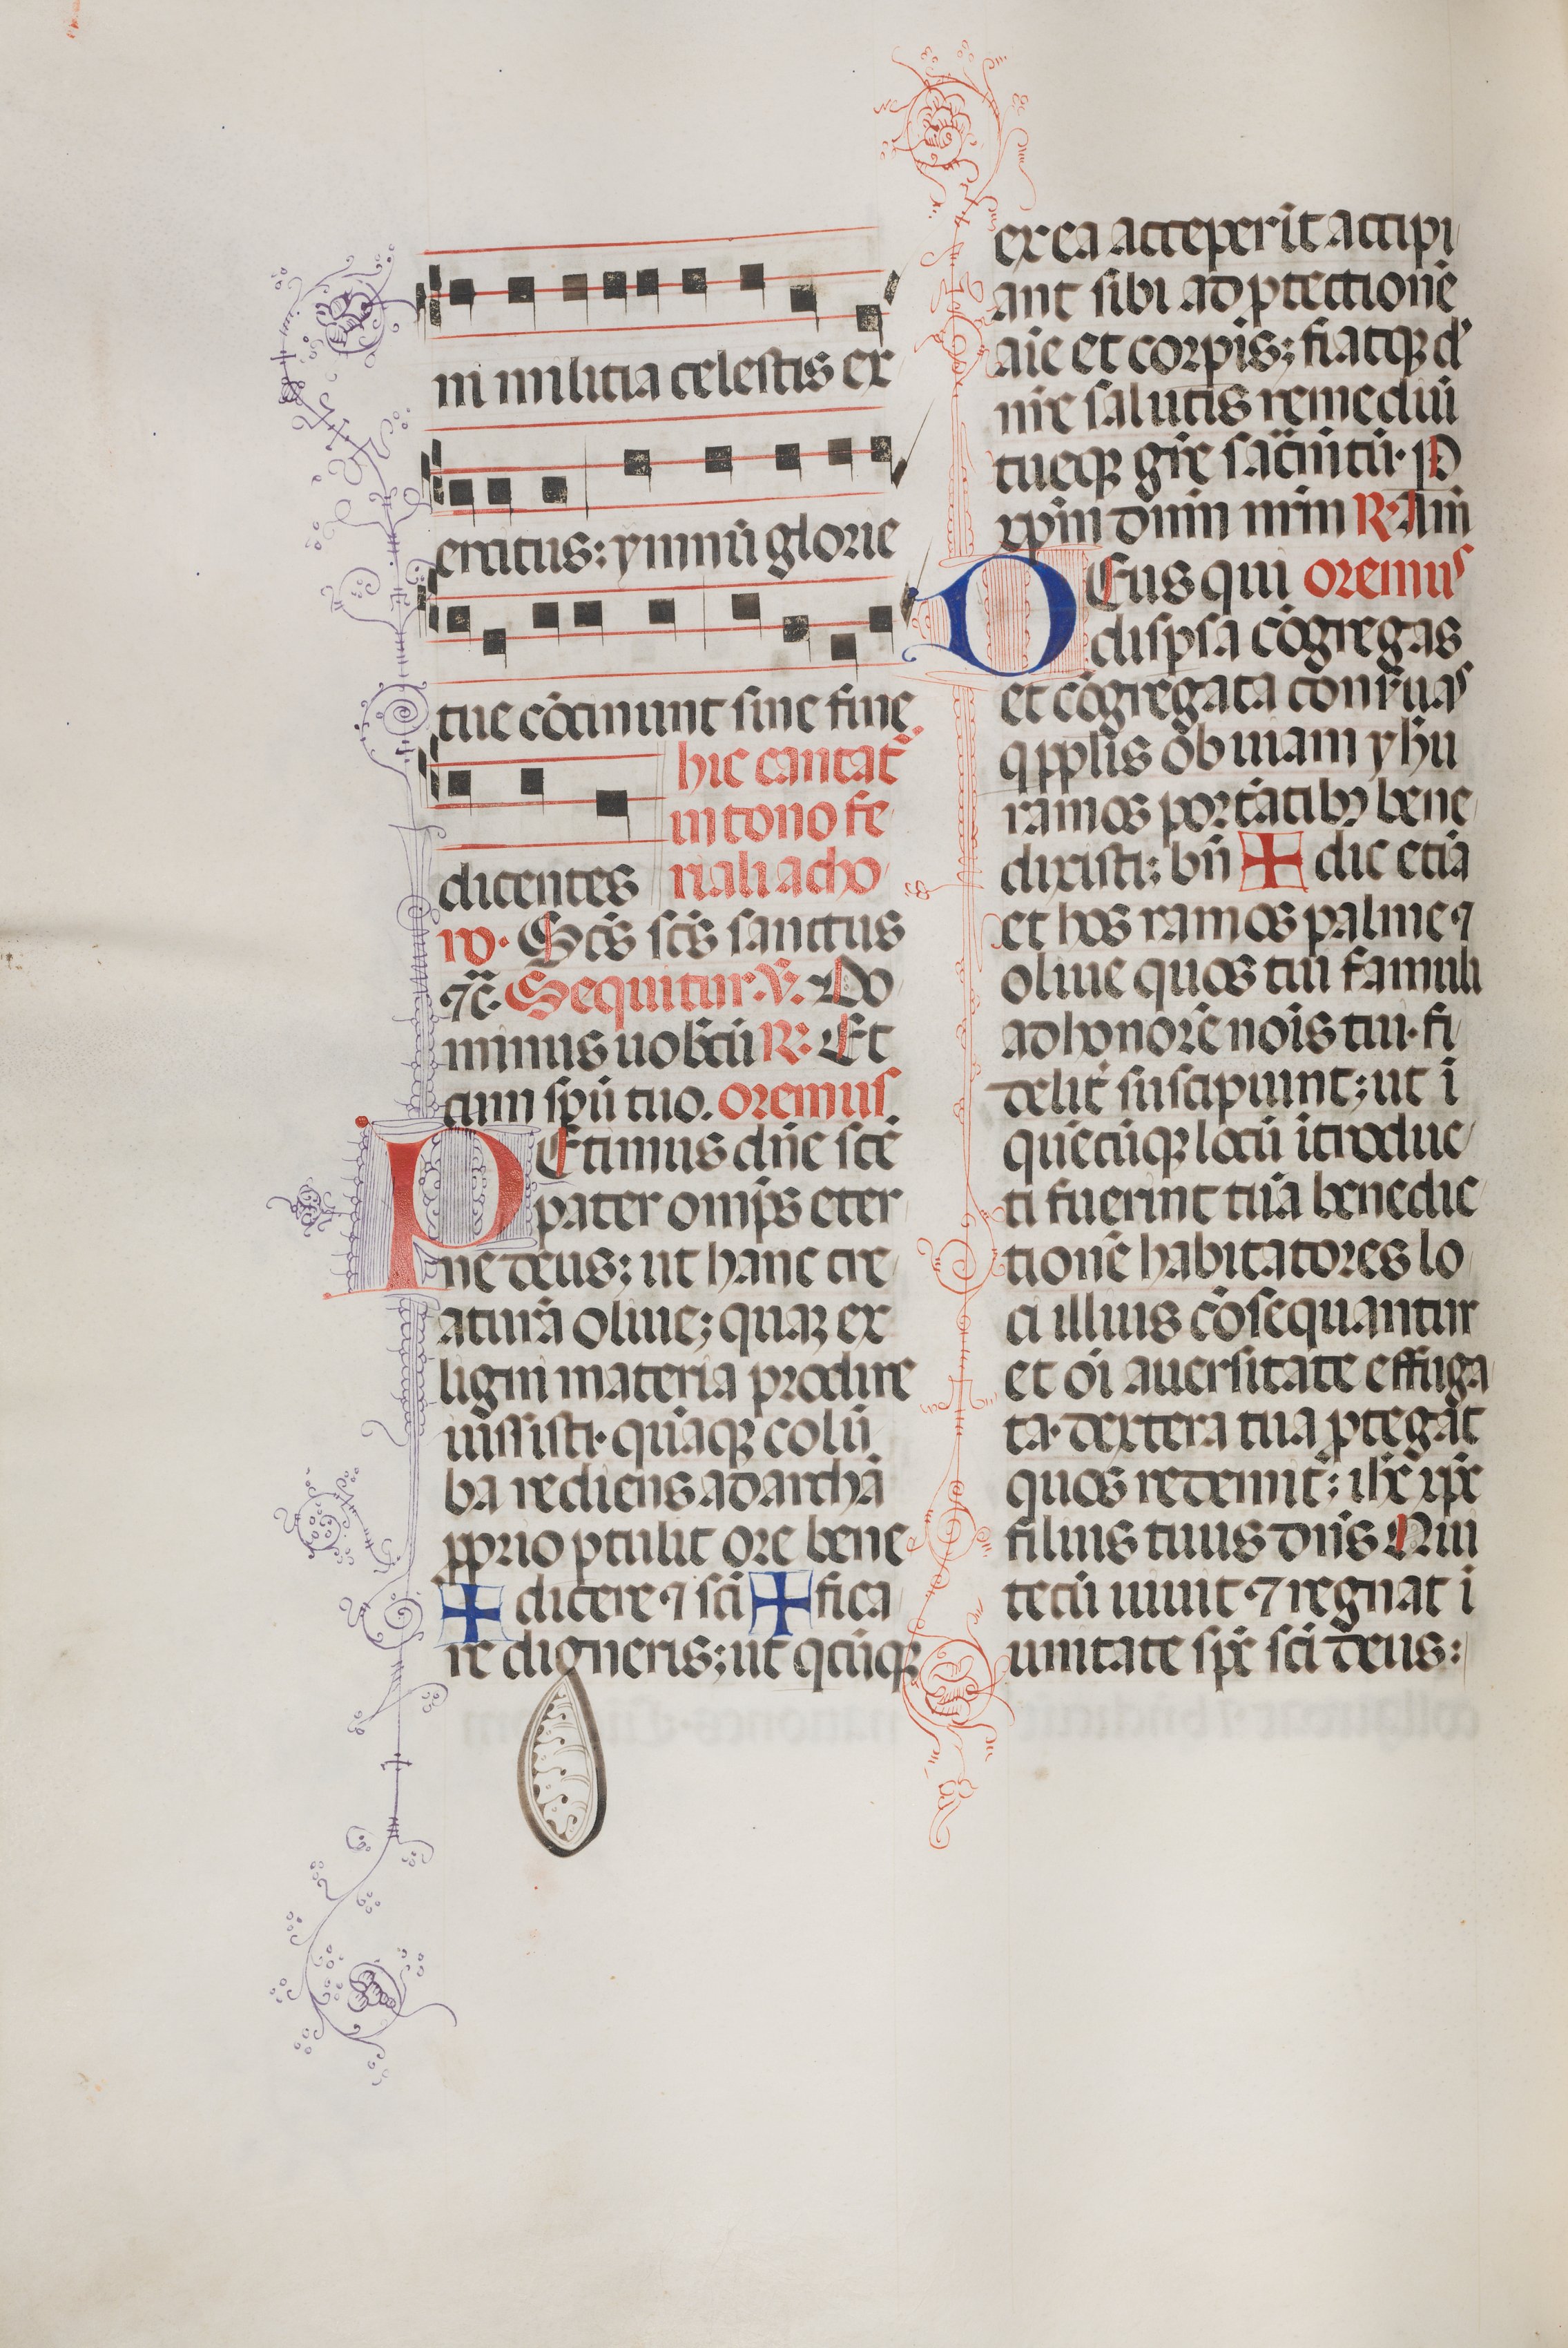 Missale: Fol. 112v: contains some music as part of Palm Sunday liturgy